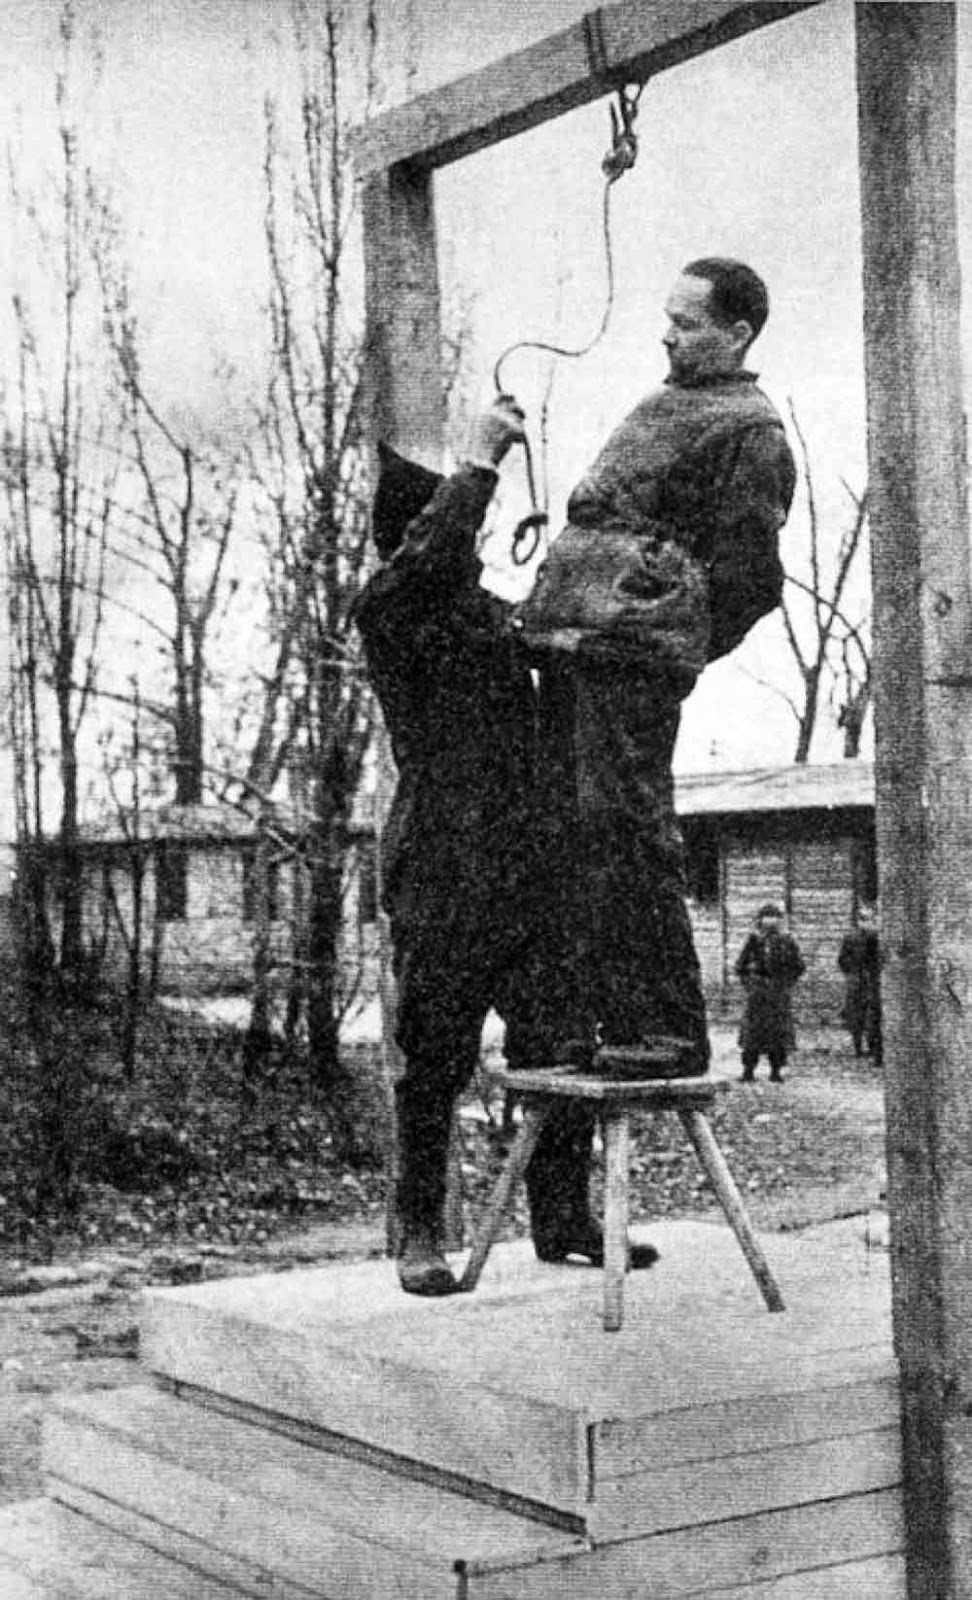 Rudolf Höss being prepared for hanging, Auschwitz Concentration Camp, Poland, 16 Apr 1947, photo 1 of 2